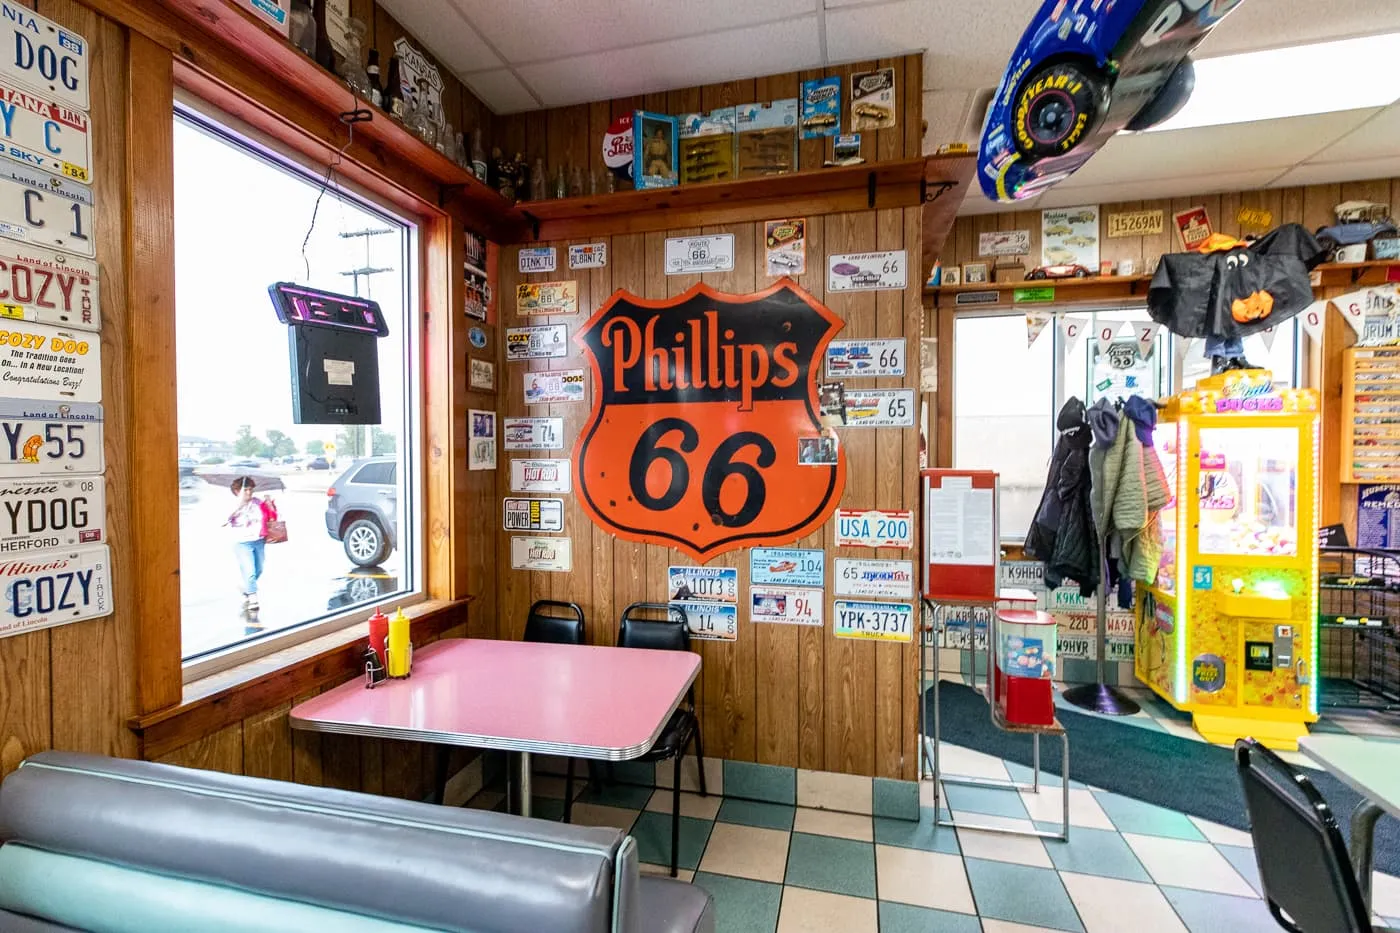 Inside Cozy Dog Drive In in Springfield, Illinois on Route 66